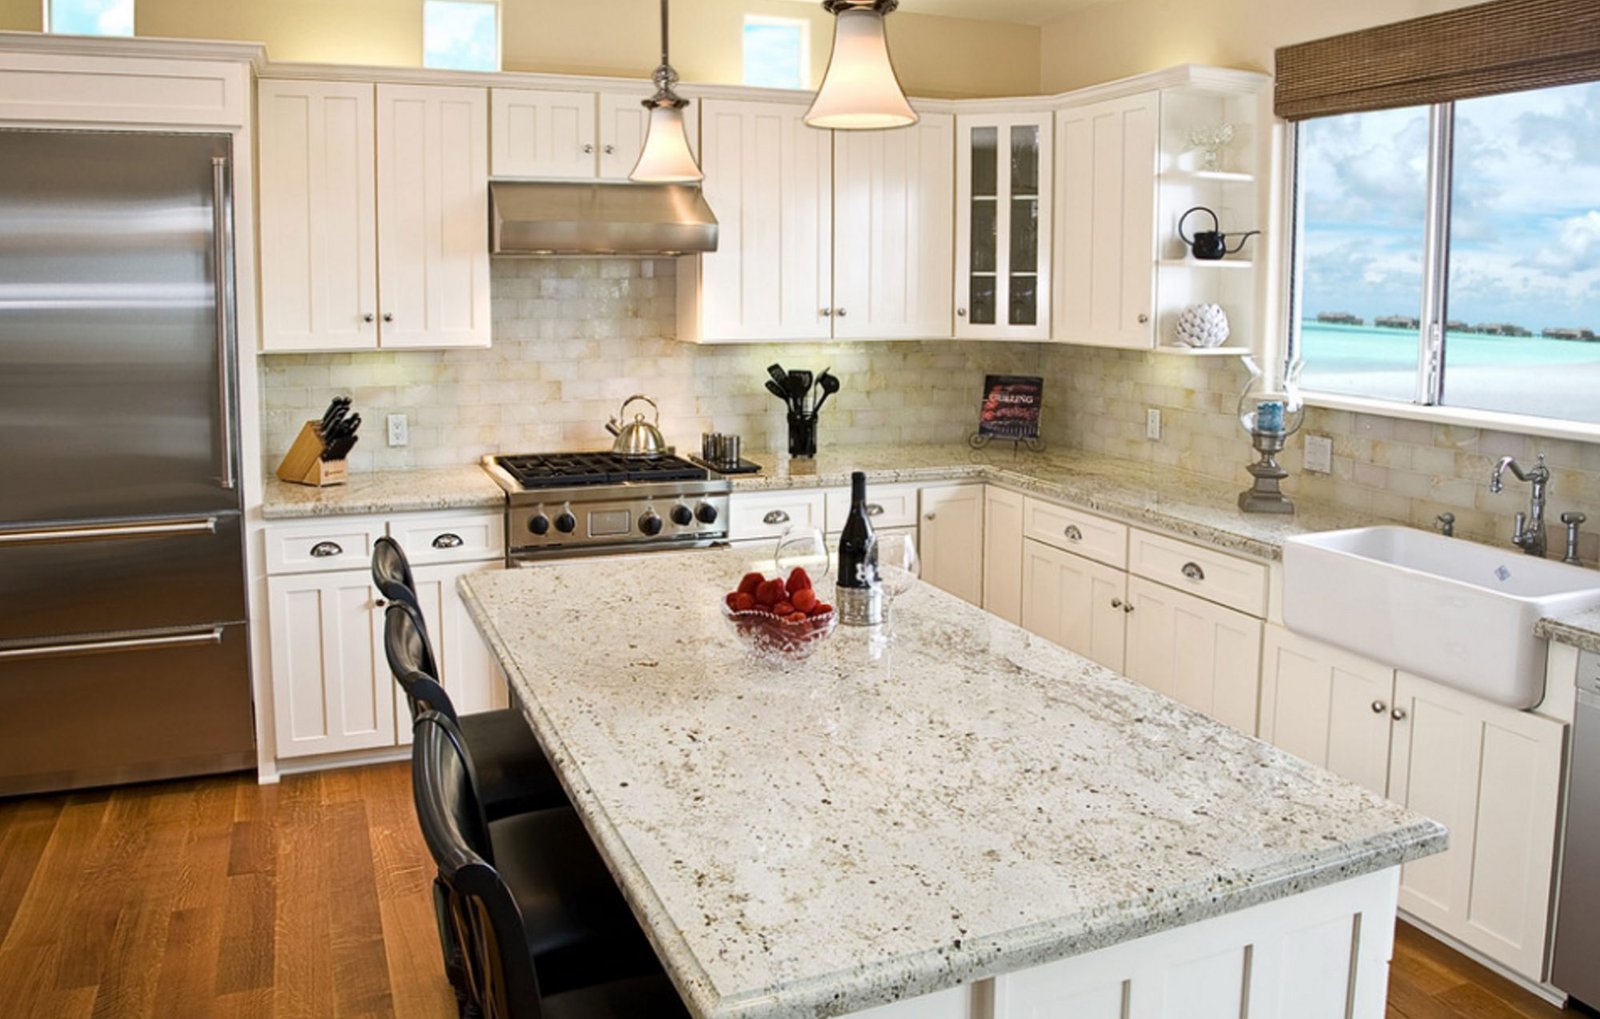 How to Clean Granite Countertops with Natural Products